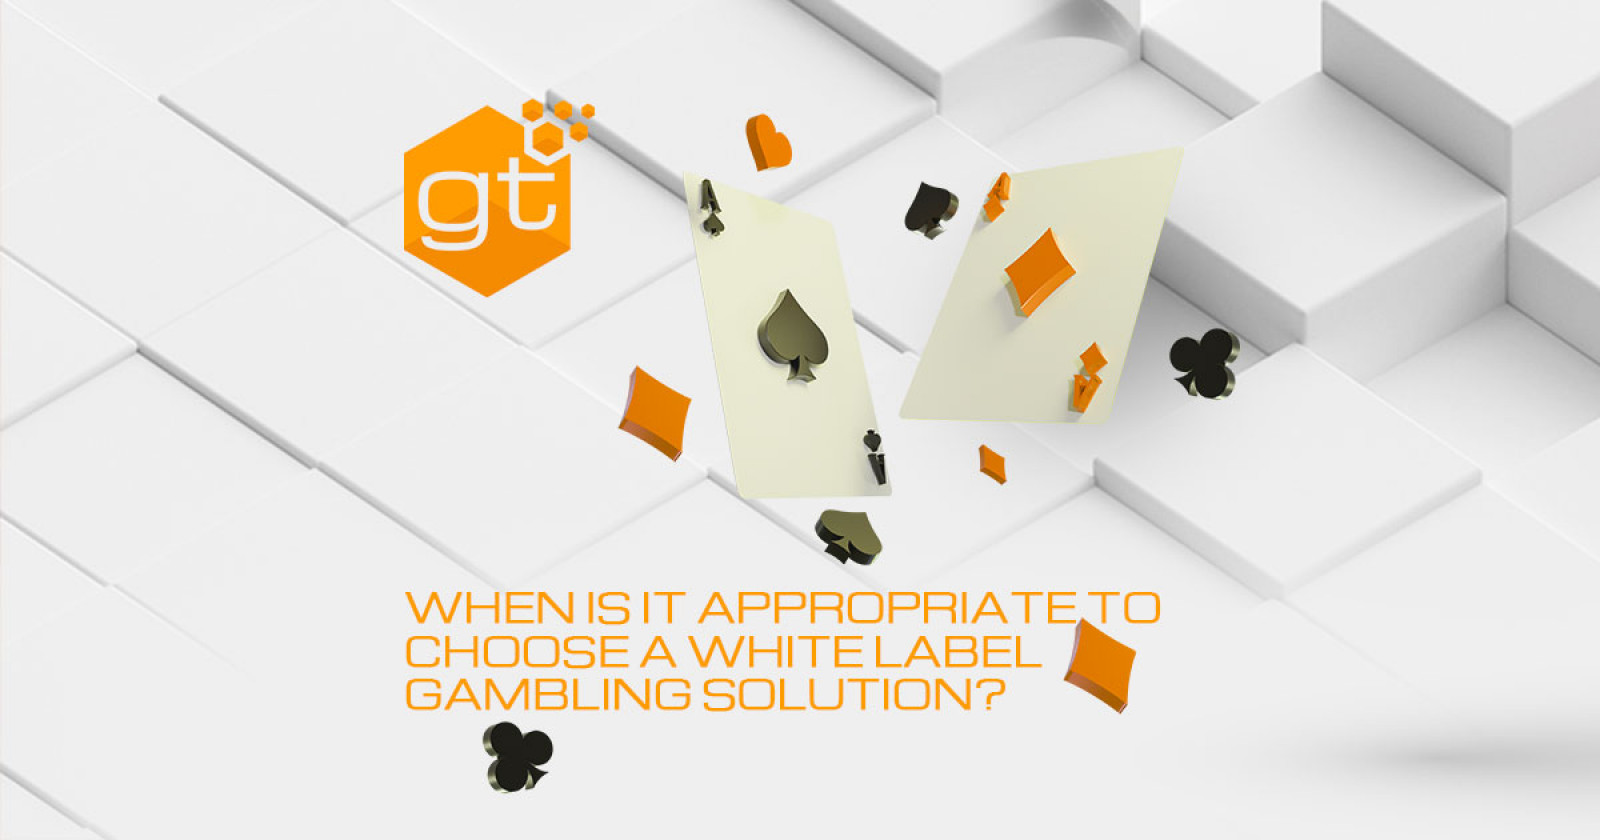 When is it appropriate to go for a white label gambling solution?